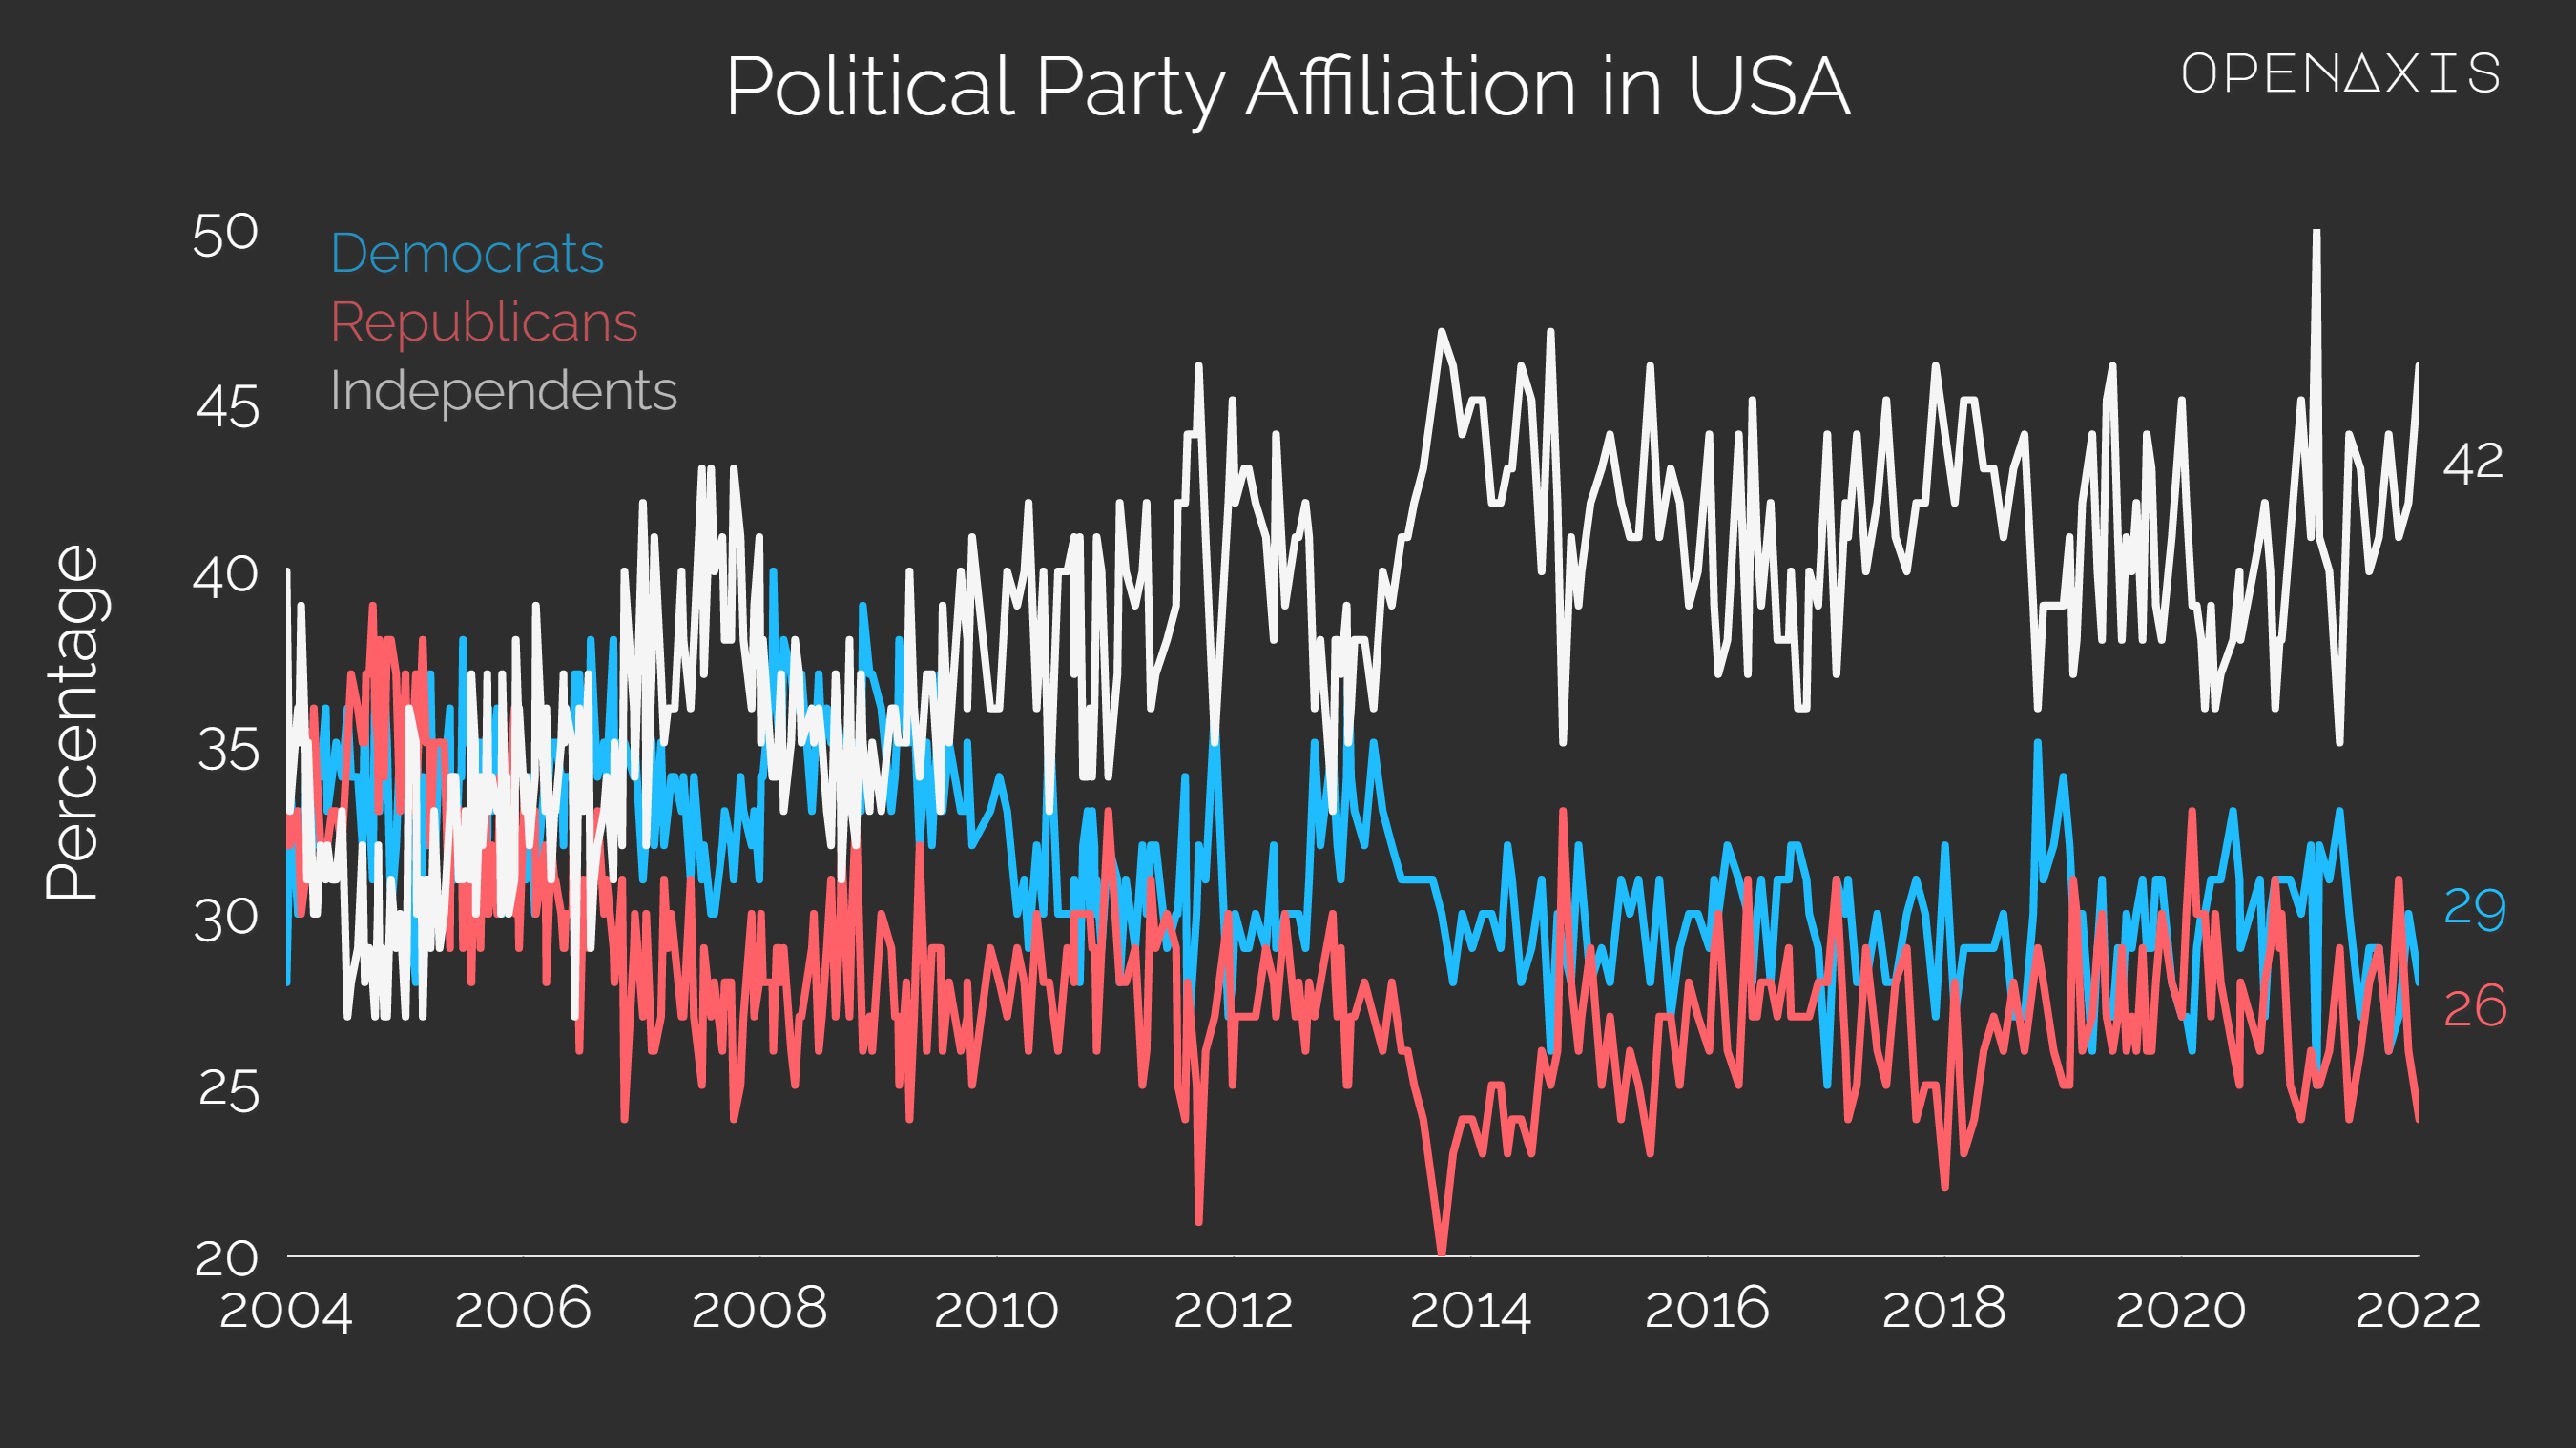 "Political Party Affiliation in USA"